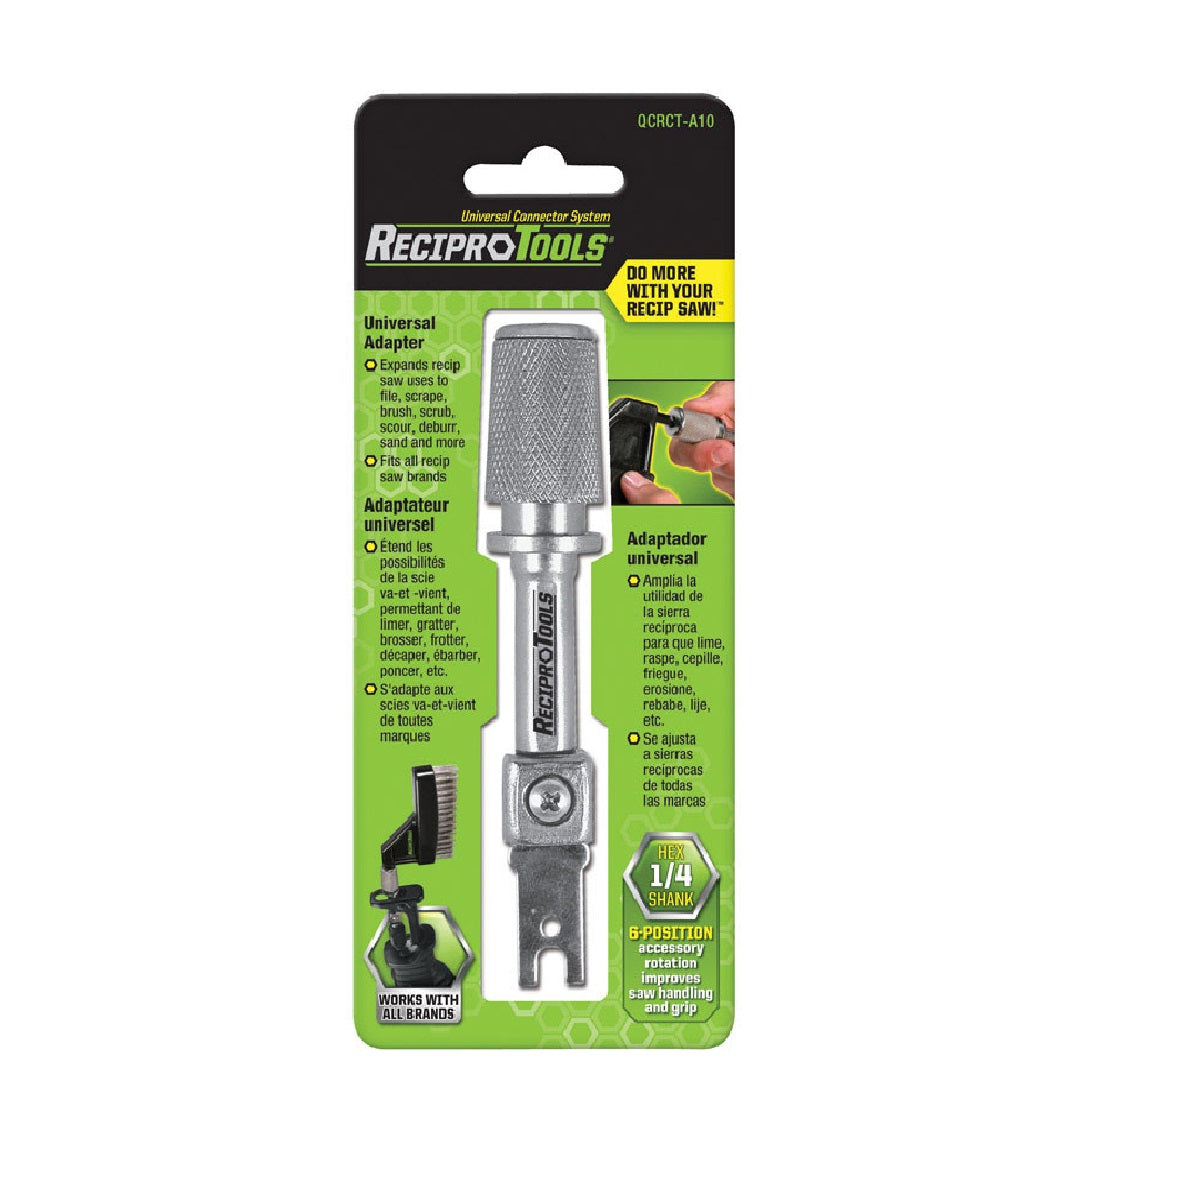 Buy recipro tools - Online store for power tool accessories, power cutting accessories in USA, on sale, low price, discount deals, coupon code